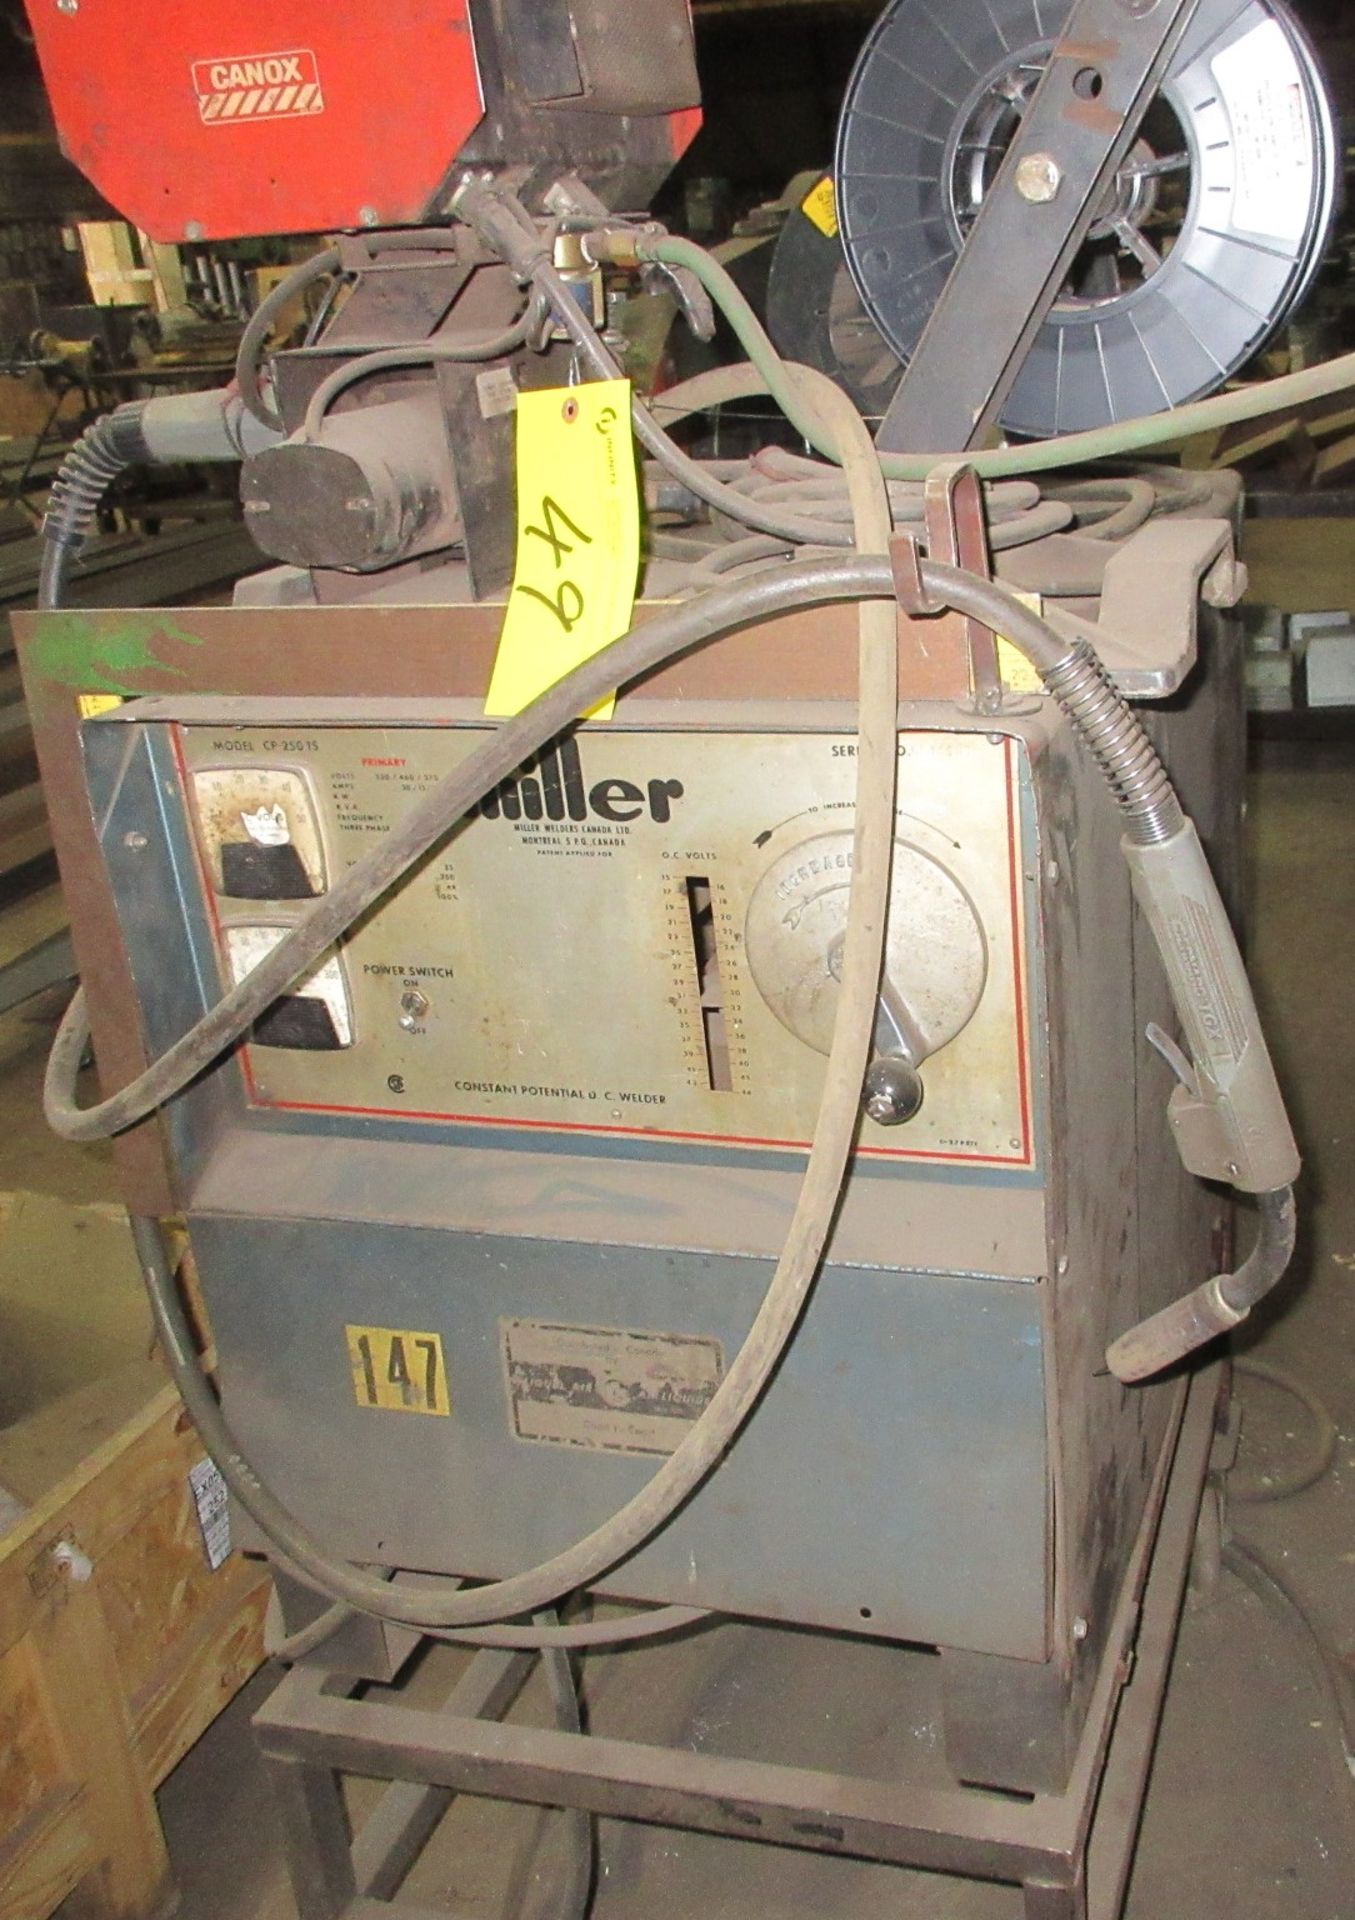 MILLER CP-250TS WELDER W/ CANOX C354E WIRE FEEDER, CART AND CABLES - Image 2 of 4